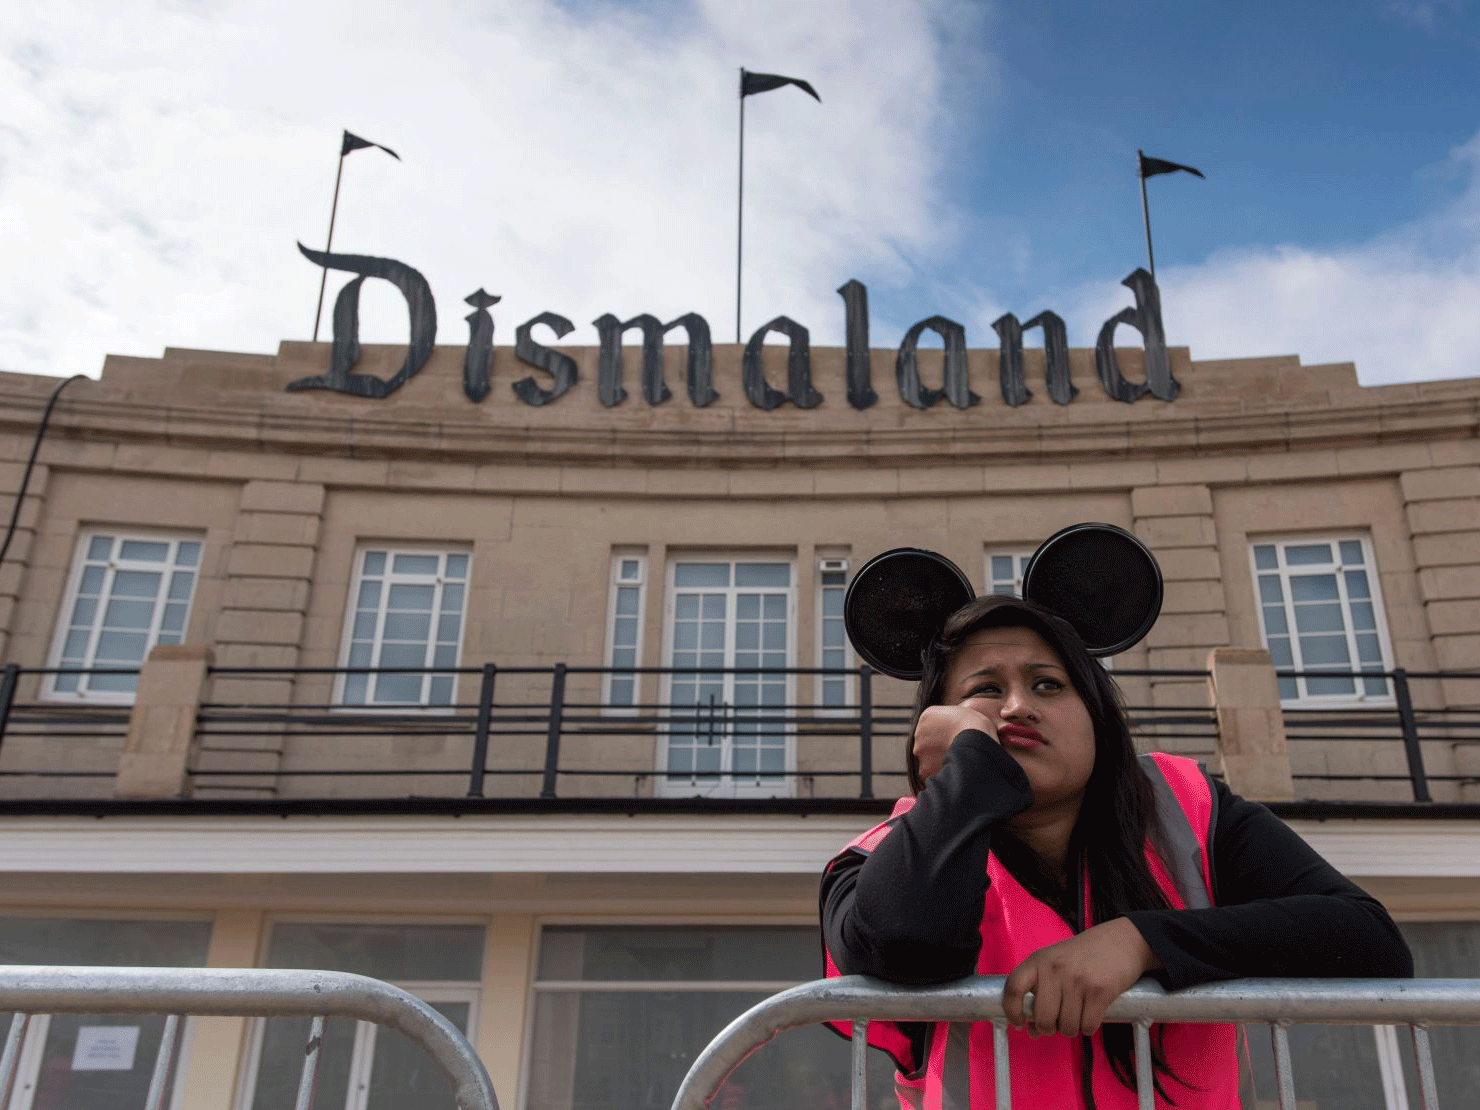 One of the park's trademark bored steward stands below the rusting Dismaland sign in Weston Super Mare